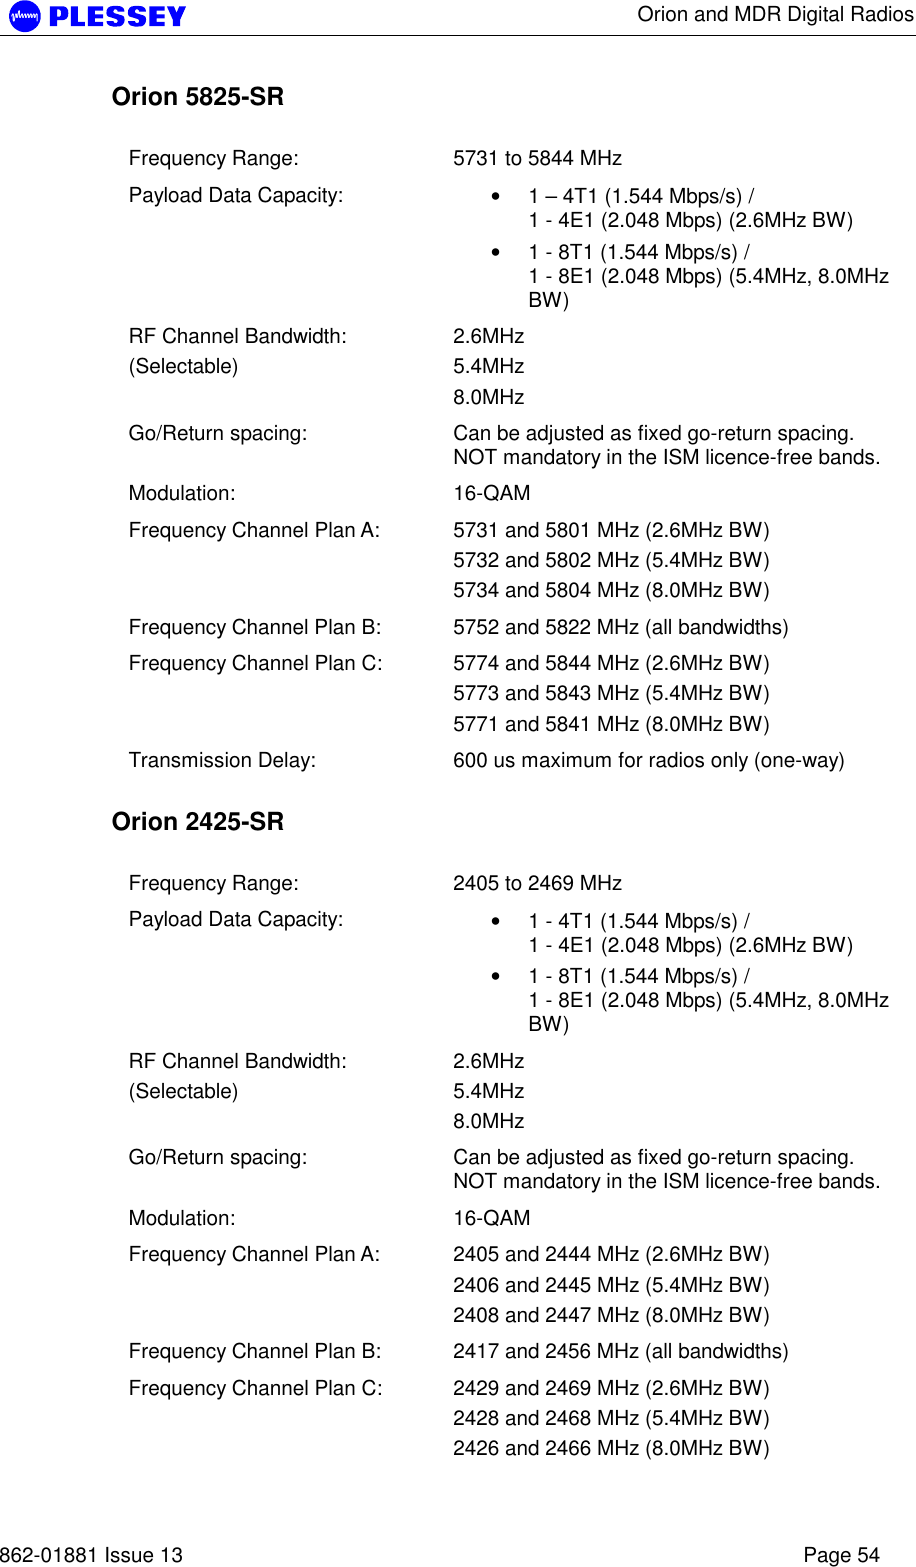      Orion and MDR Digital Radios   862-01881 Issue 13    Page 54 Orion 5825-SR  Frequency Range:  5731 to 5844 MHz Payload Data Capacity:  • 1 – 4T1 (1.544 Mbps/s) /  1 - 4E1 (2.048 Mbps) (2.6MHz BW) • 1 - 8T1 (1.544 Mbps/s) /  1 - 8E1 (2.048 Mbps) (5.4MHz, 8.0MHz BW) RF Channel Bandwidth: (Selectable) 2.6MHz 5.4MHz 8.0MHz Go/Return spacing:  Can be adjusted as fixed go-return spacing. NOT mandatory in the ISM licence-free bands.   Modulation: 16-QAM  Frequency Channel Plan A:  5731 and 5801 MHz (2.6MHz BW) 5732 and 5802 MHz (5.4MHz BW) 5734 and 5804 MHz (8.0MHz BW) Frequency Channel Plan B:  5752 and 5822 MHz (all bandwidths) Frequency Channel Plan C:  5774 and 5844 MHz (2.6MHz BW) 5773 and 5843 MHz (5.4MHz BW) 5771 and 5841 MHz (8.0MHz BW) Transmission Delay:  600 us maximum for radios only (one-way)  Orion 2425-SR  Frequency Range:  2405 to 2469 MHz Payload Data Capacity:  • 1 - 4T1 (1.544 Mbps/s) /  1 - 4E1 (2.048 Mbps) (2.6MHz BW) • 1 - 8T1 (1.544 Mbps/s) /  1 - 8E1 (2.048 Mbps) (5.4MHz, 8.0MHz BW) RF Channel Bandwidth: (Selectable) 2.6MHz 5.4MHz 8.0MHz Go/Return spacing:  Can be adjusted as fixed go-return spacing. NOT mandatory in the ISM licence-free bands.   Modulation: 16-QAM  Frequency Channel Plan A:  2405 and 2444 MHz (2.6MHz BW) 2406 and 2445 MHz (5.4MHz BW) 2408 and 2447 MHz (8.0MHz BW) Frequency Channel Plan B:  2417 and 2456 MHz (all bandwidths) Frequency Channel Plan C:  2429 and 2469 MHz (2.6MHz BW) 2428 and 2468 MHz (5.4MHz BW) 2426 and 2466 MHz (8.0MHz BW) 